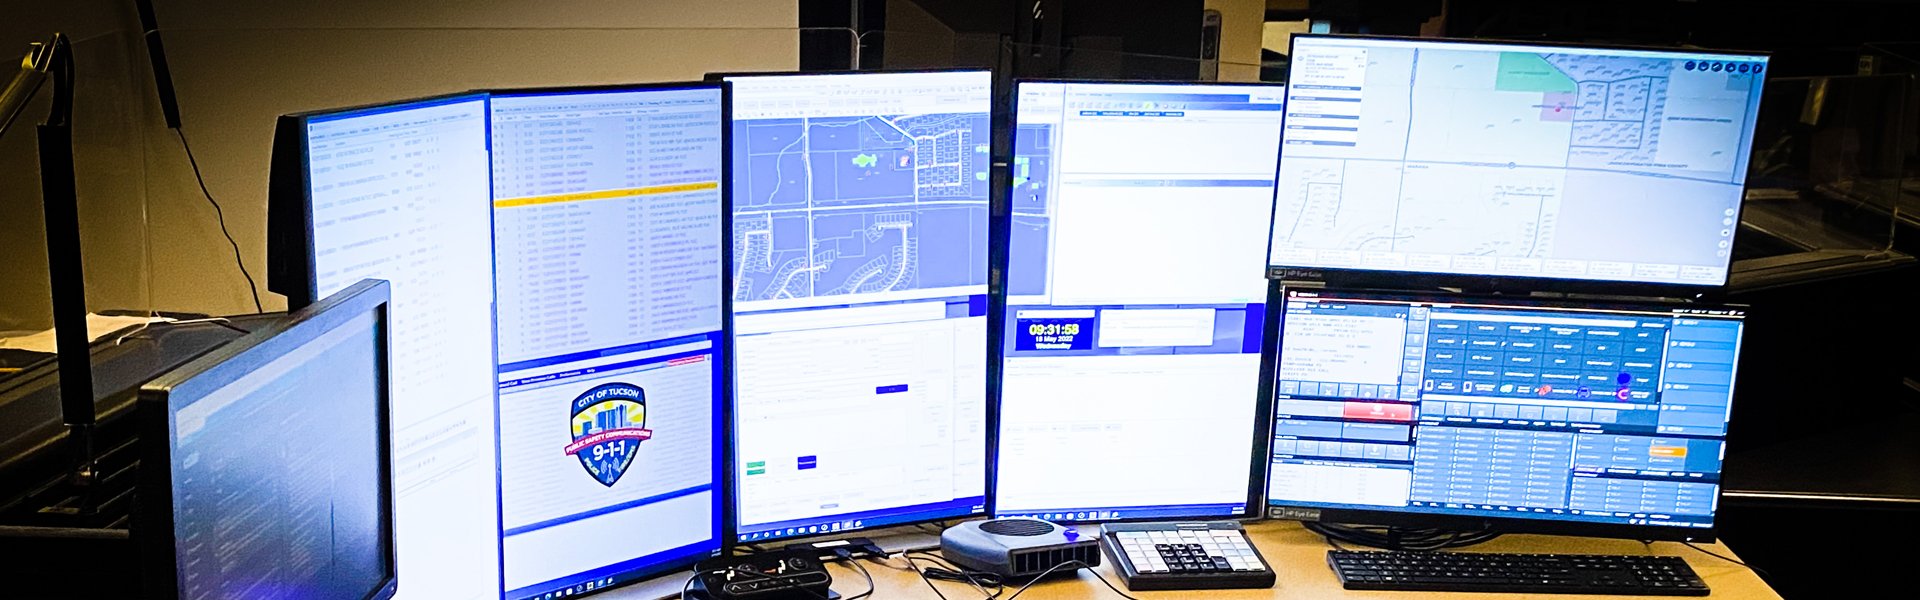 5-7 computer monitors set up for 911 command center